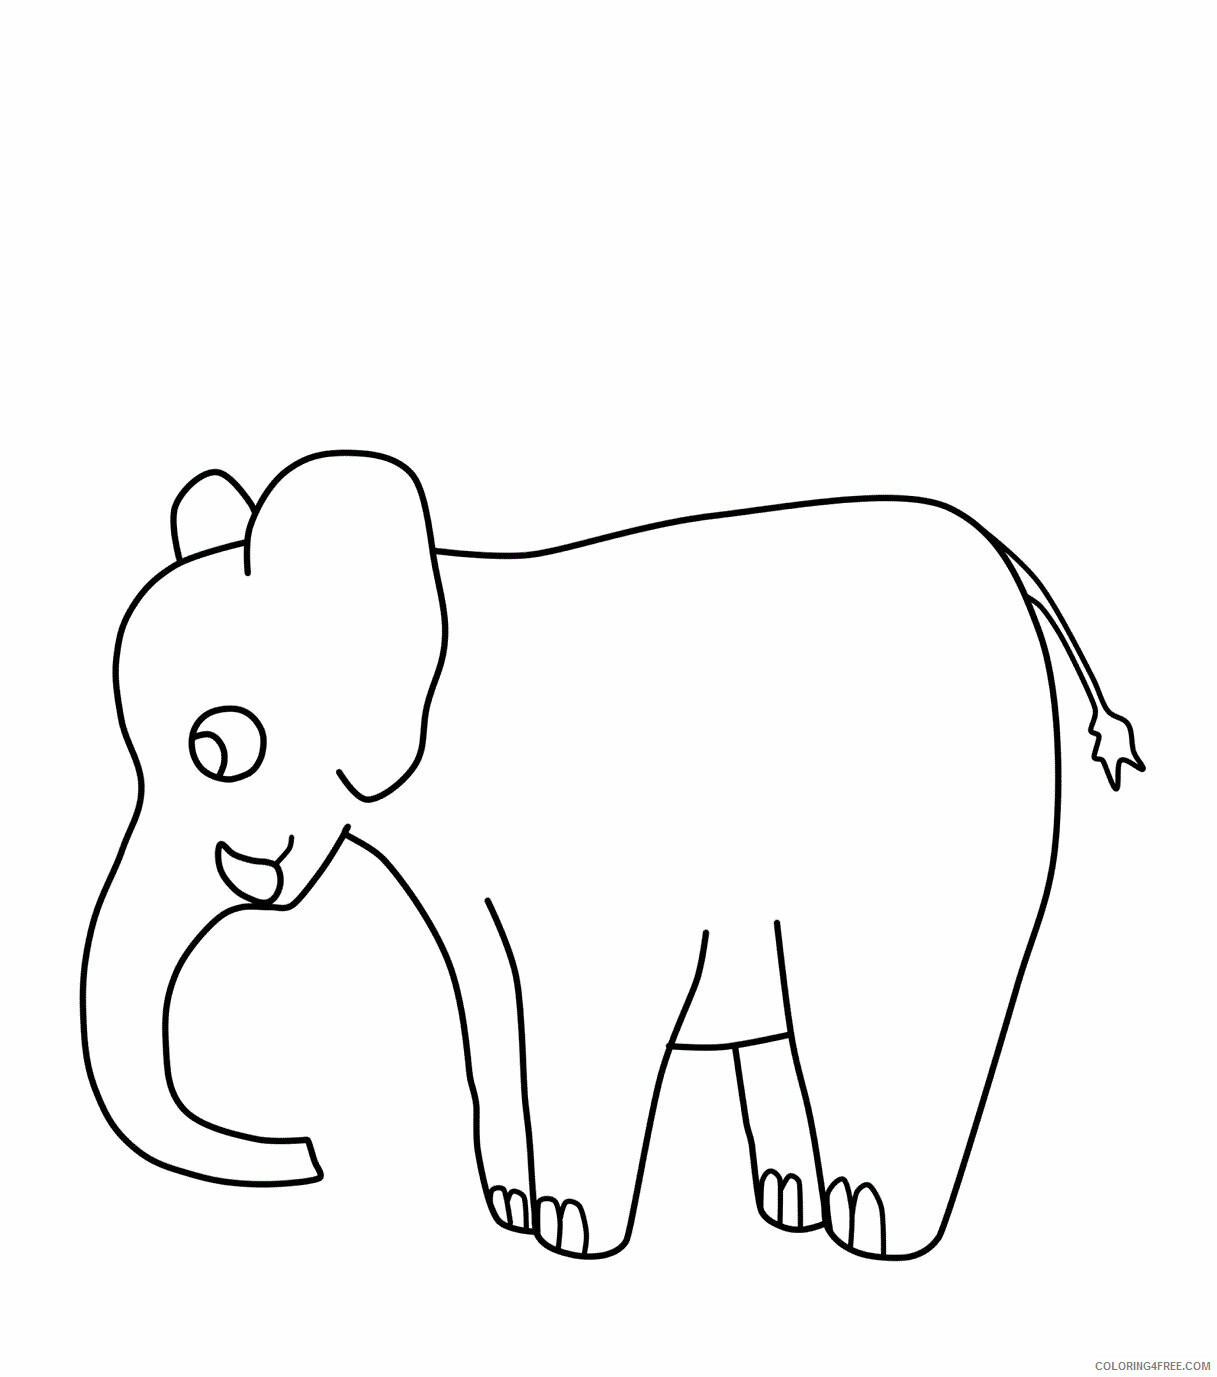 Elephant Coloring Pages Animal Printable Sheets Cartoon Elephant 2021 1930 Coloring4free